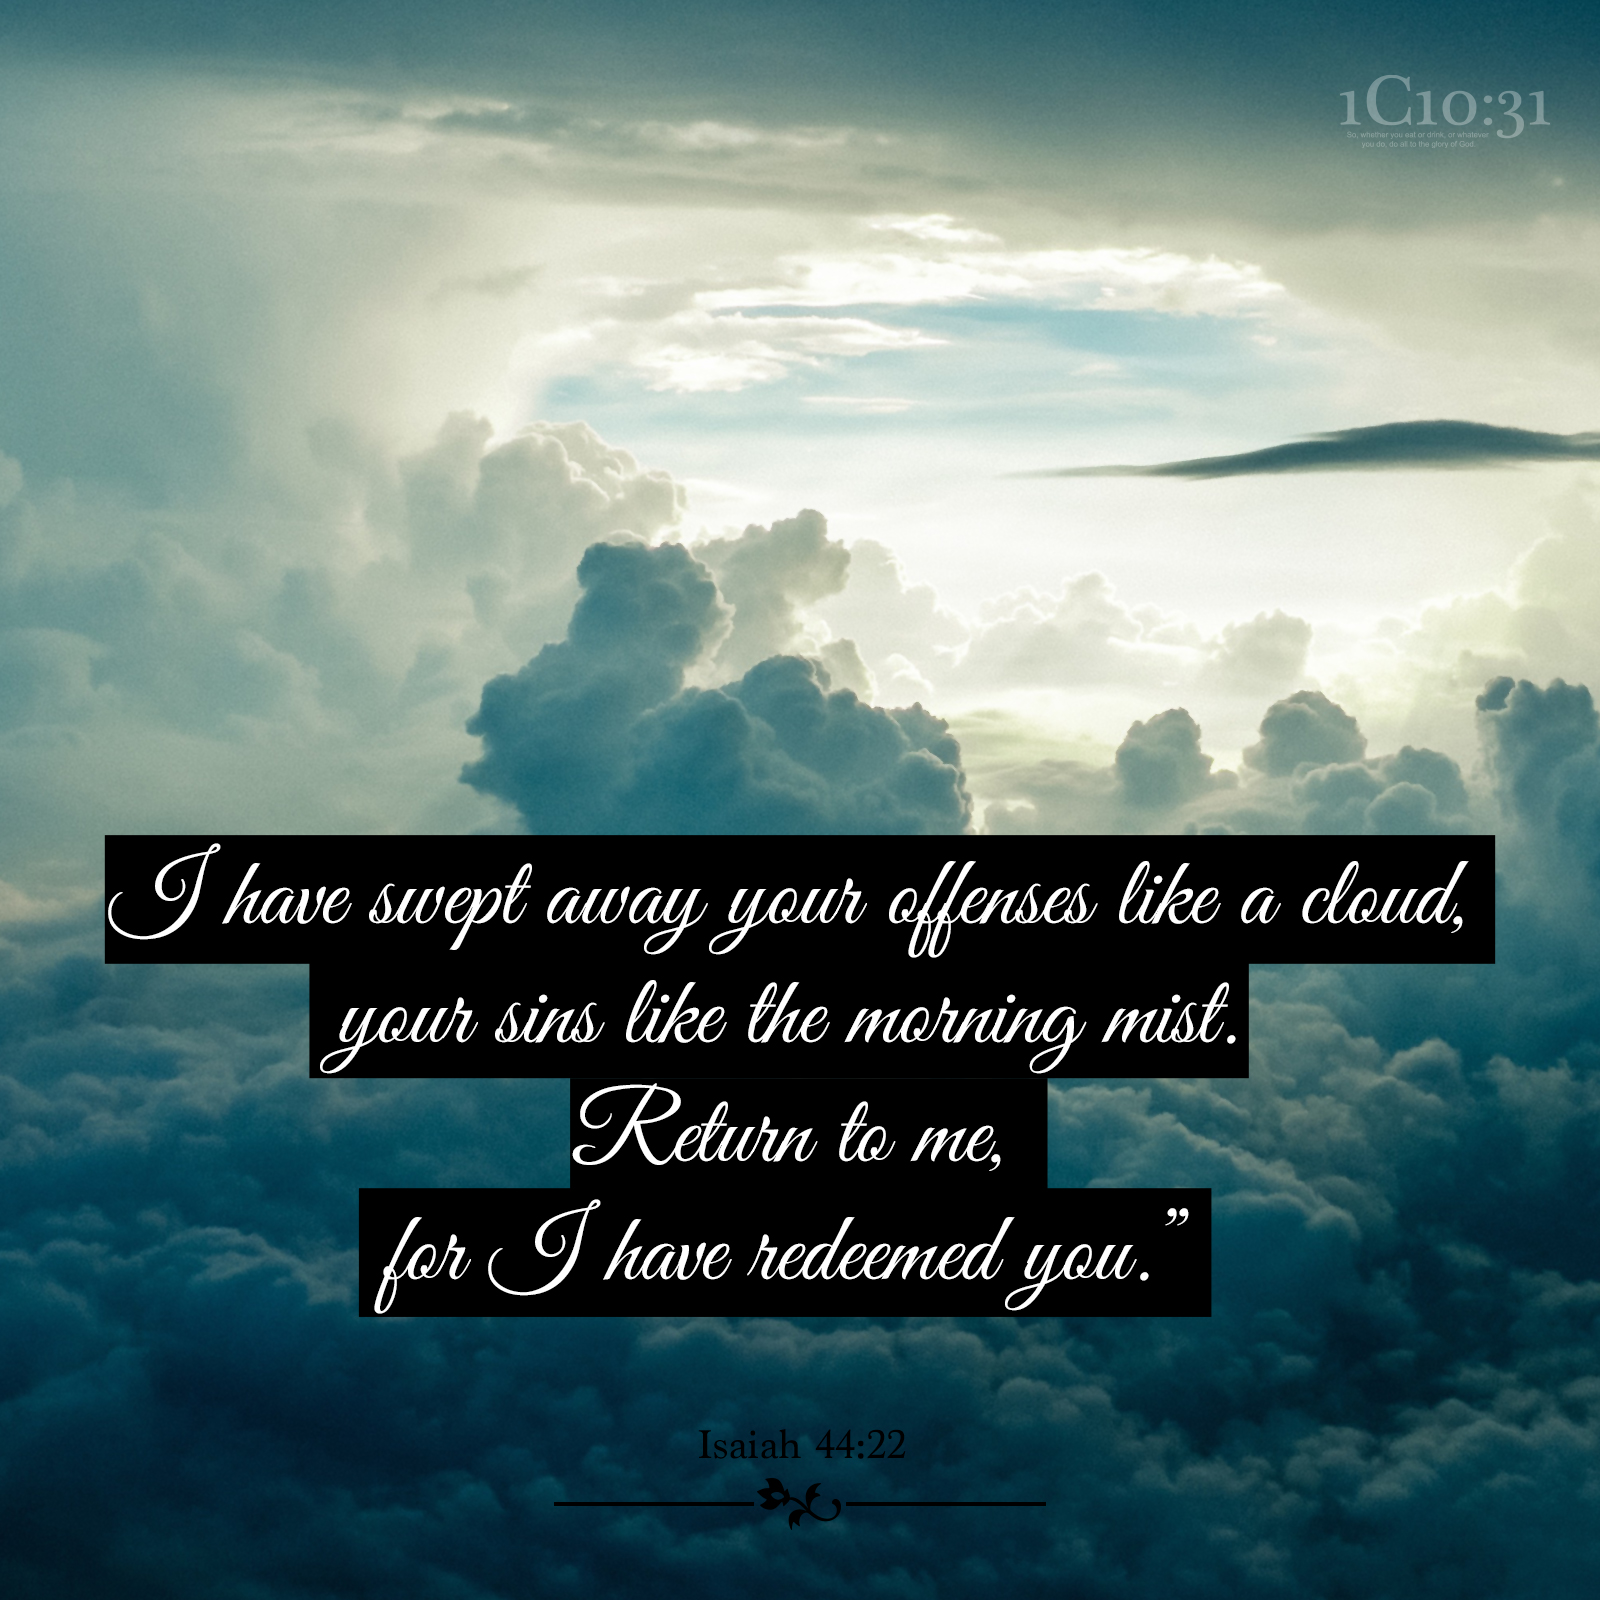 Isaiah 44:22 I have swept away your offenses like a cloud, your sins like the morning mist. Return to me, for I have redeemed you.”